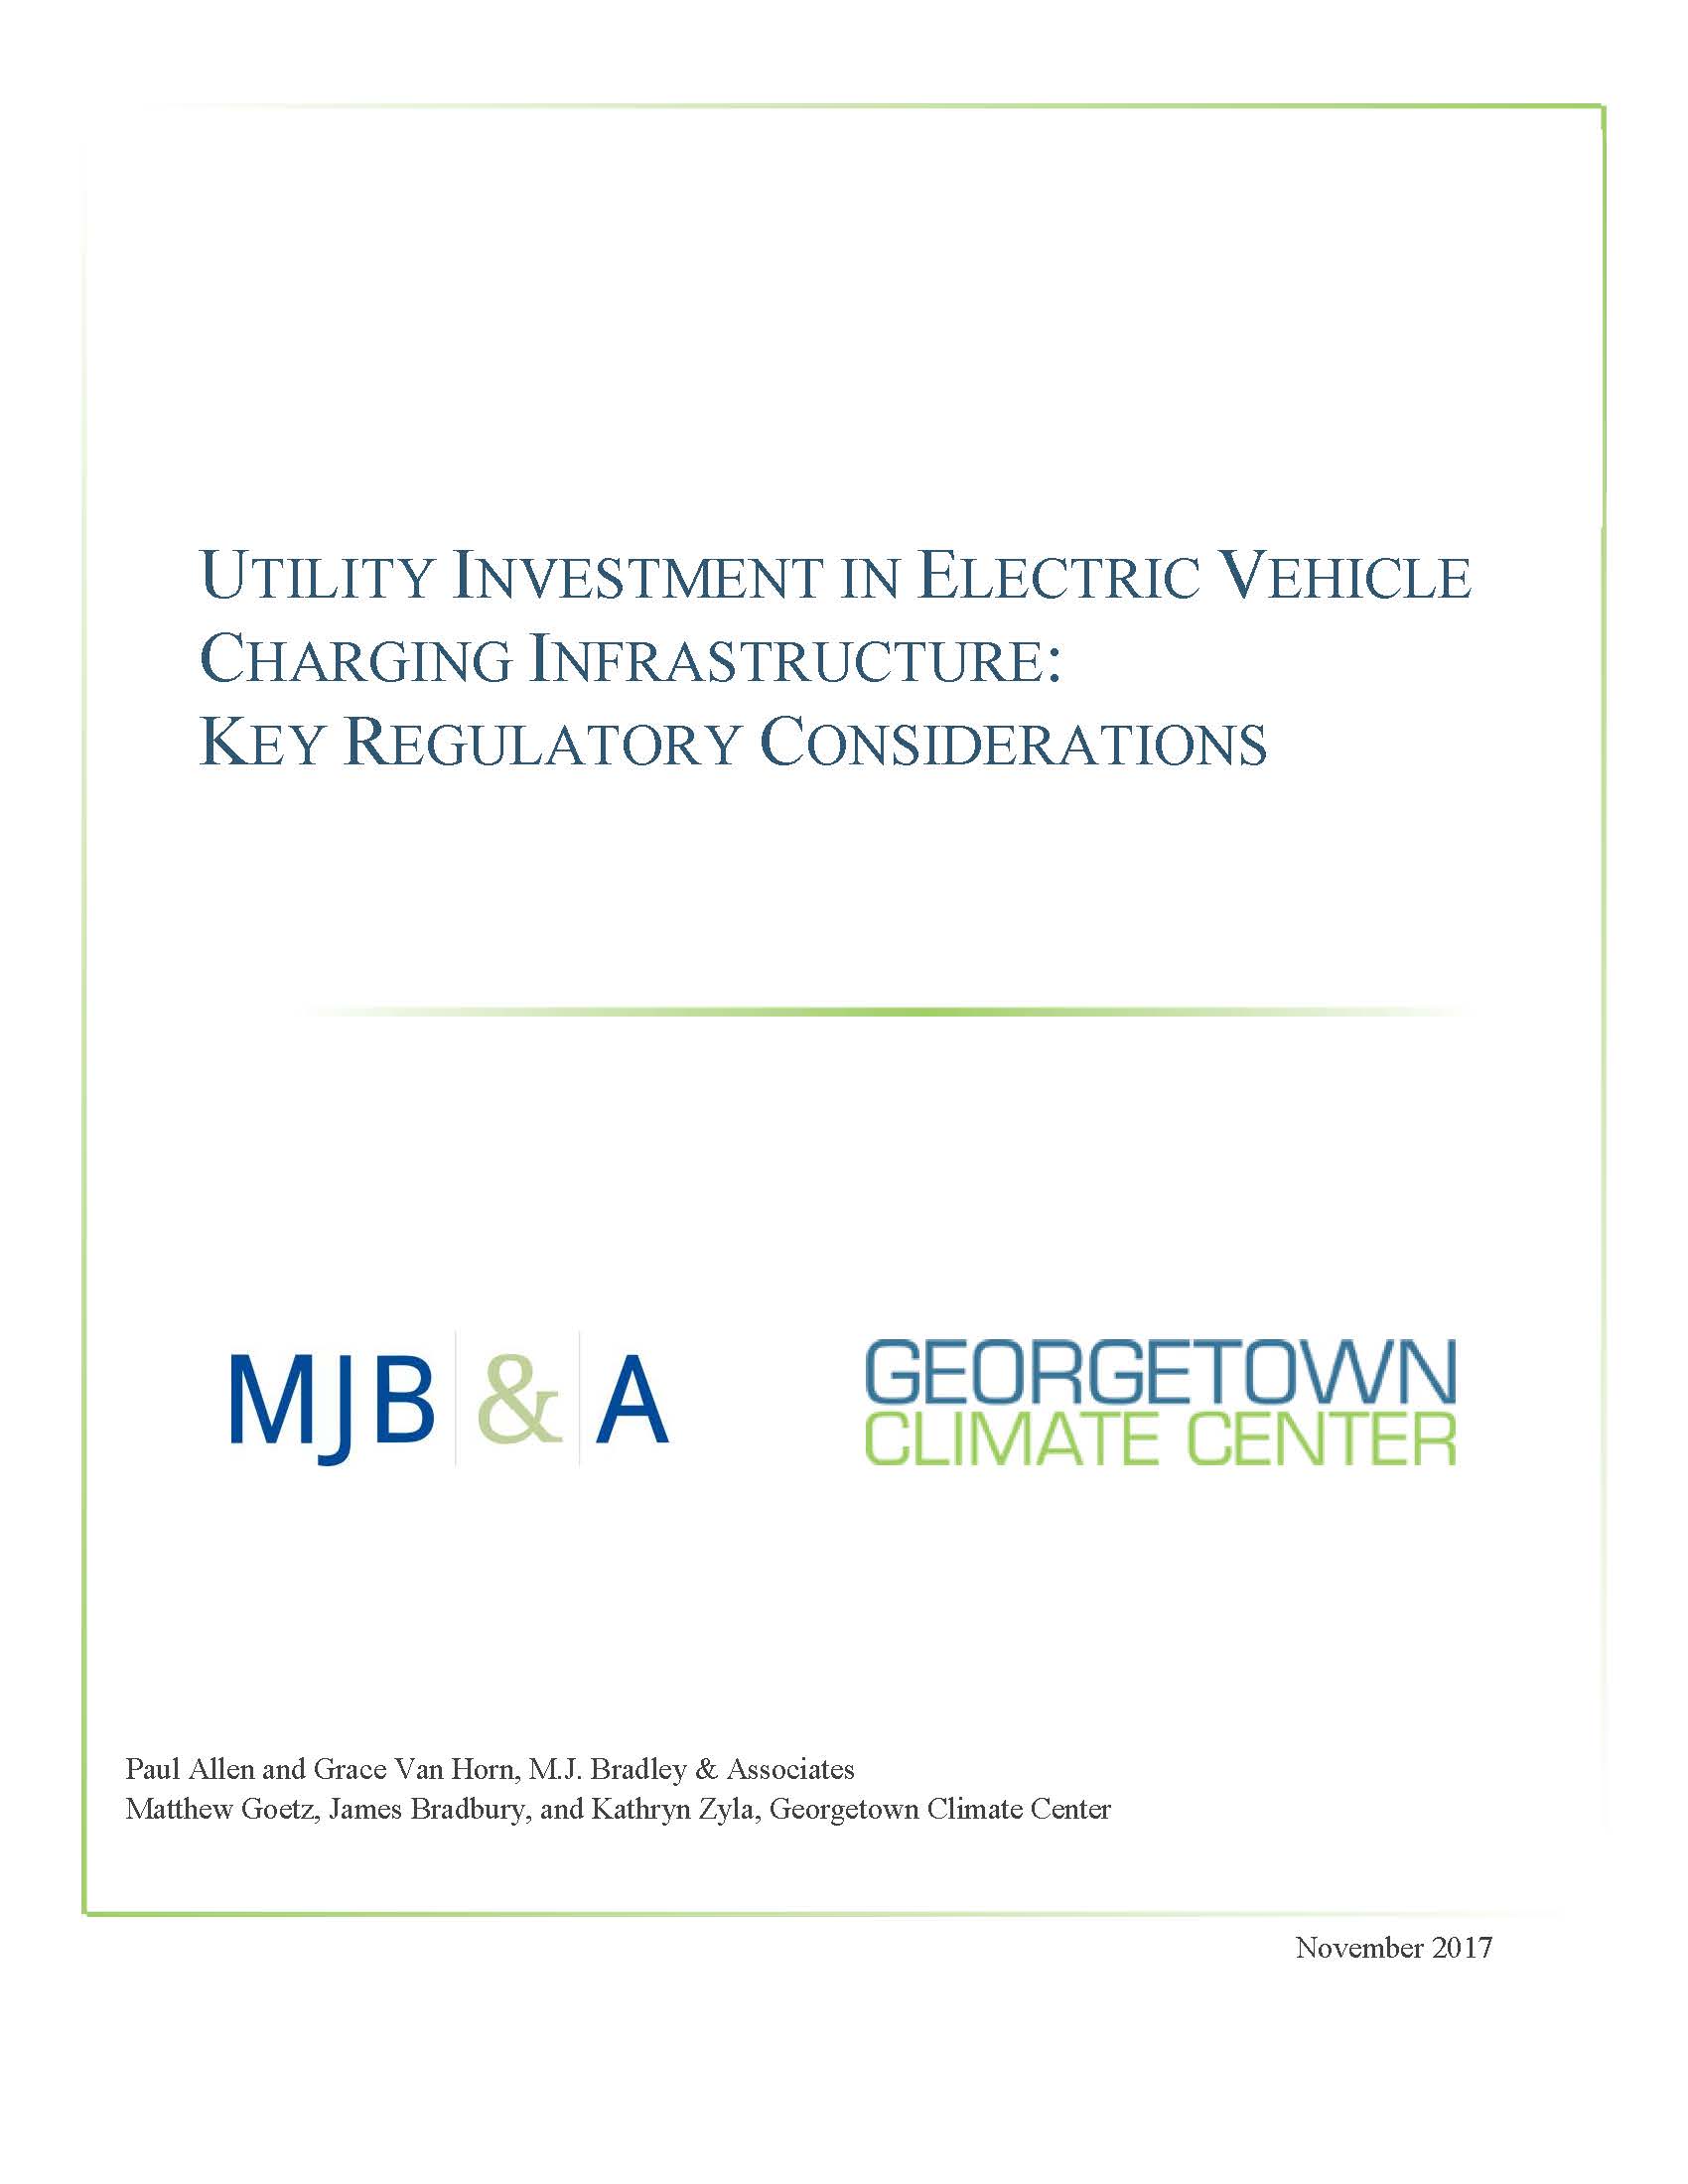 Regulatory Considerations for Utility Investment in EV Charging Infrastructure